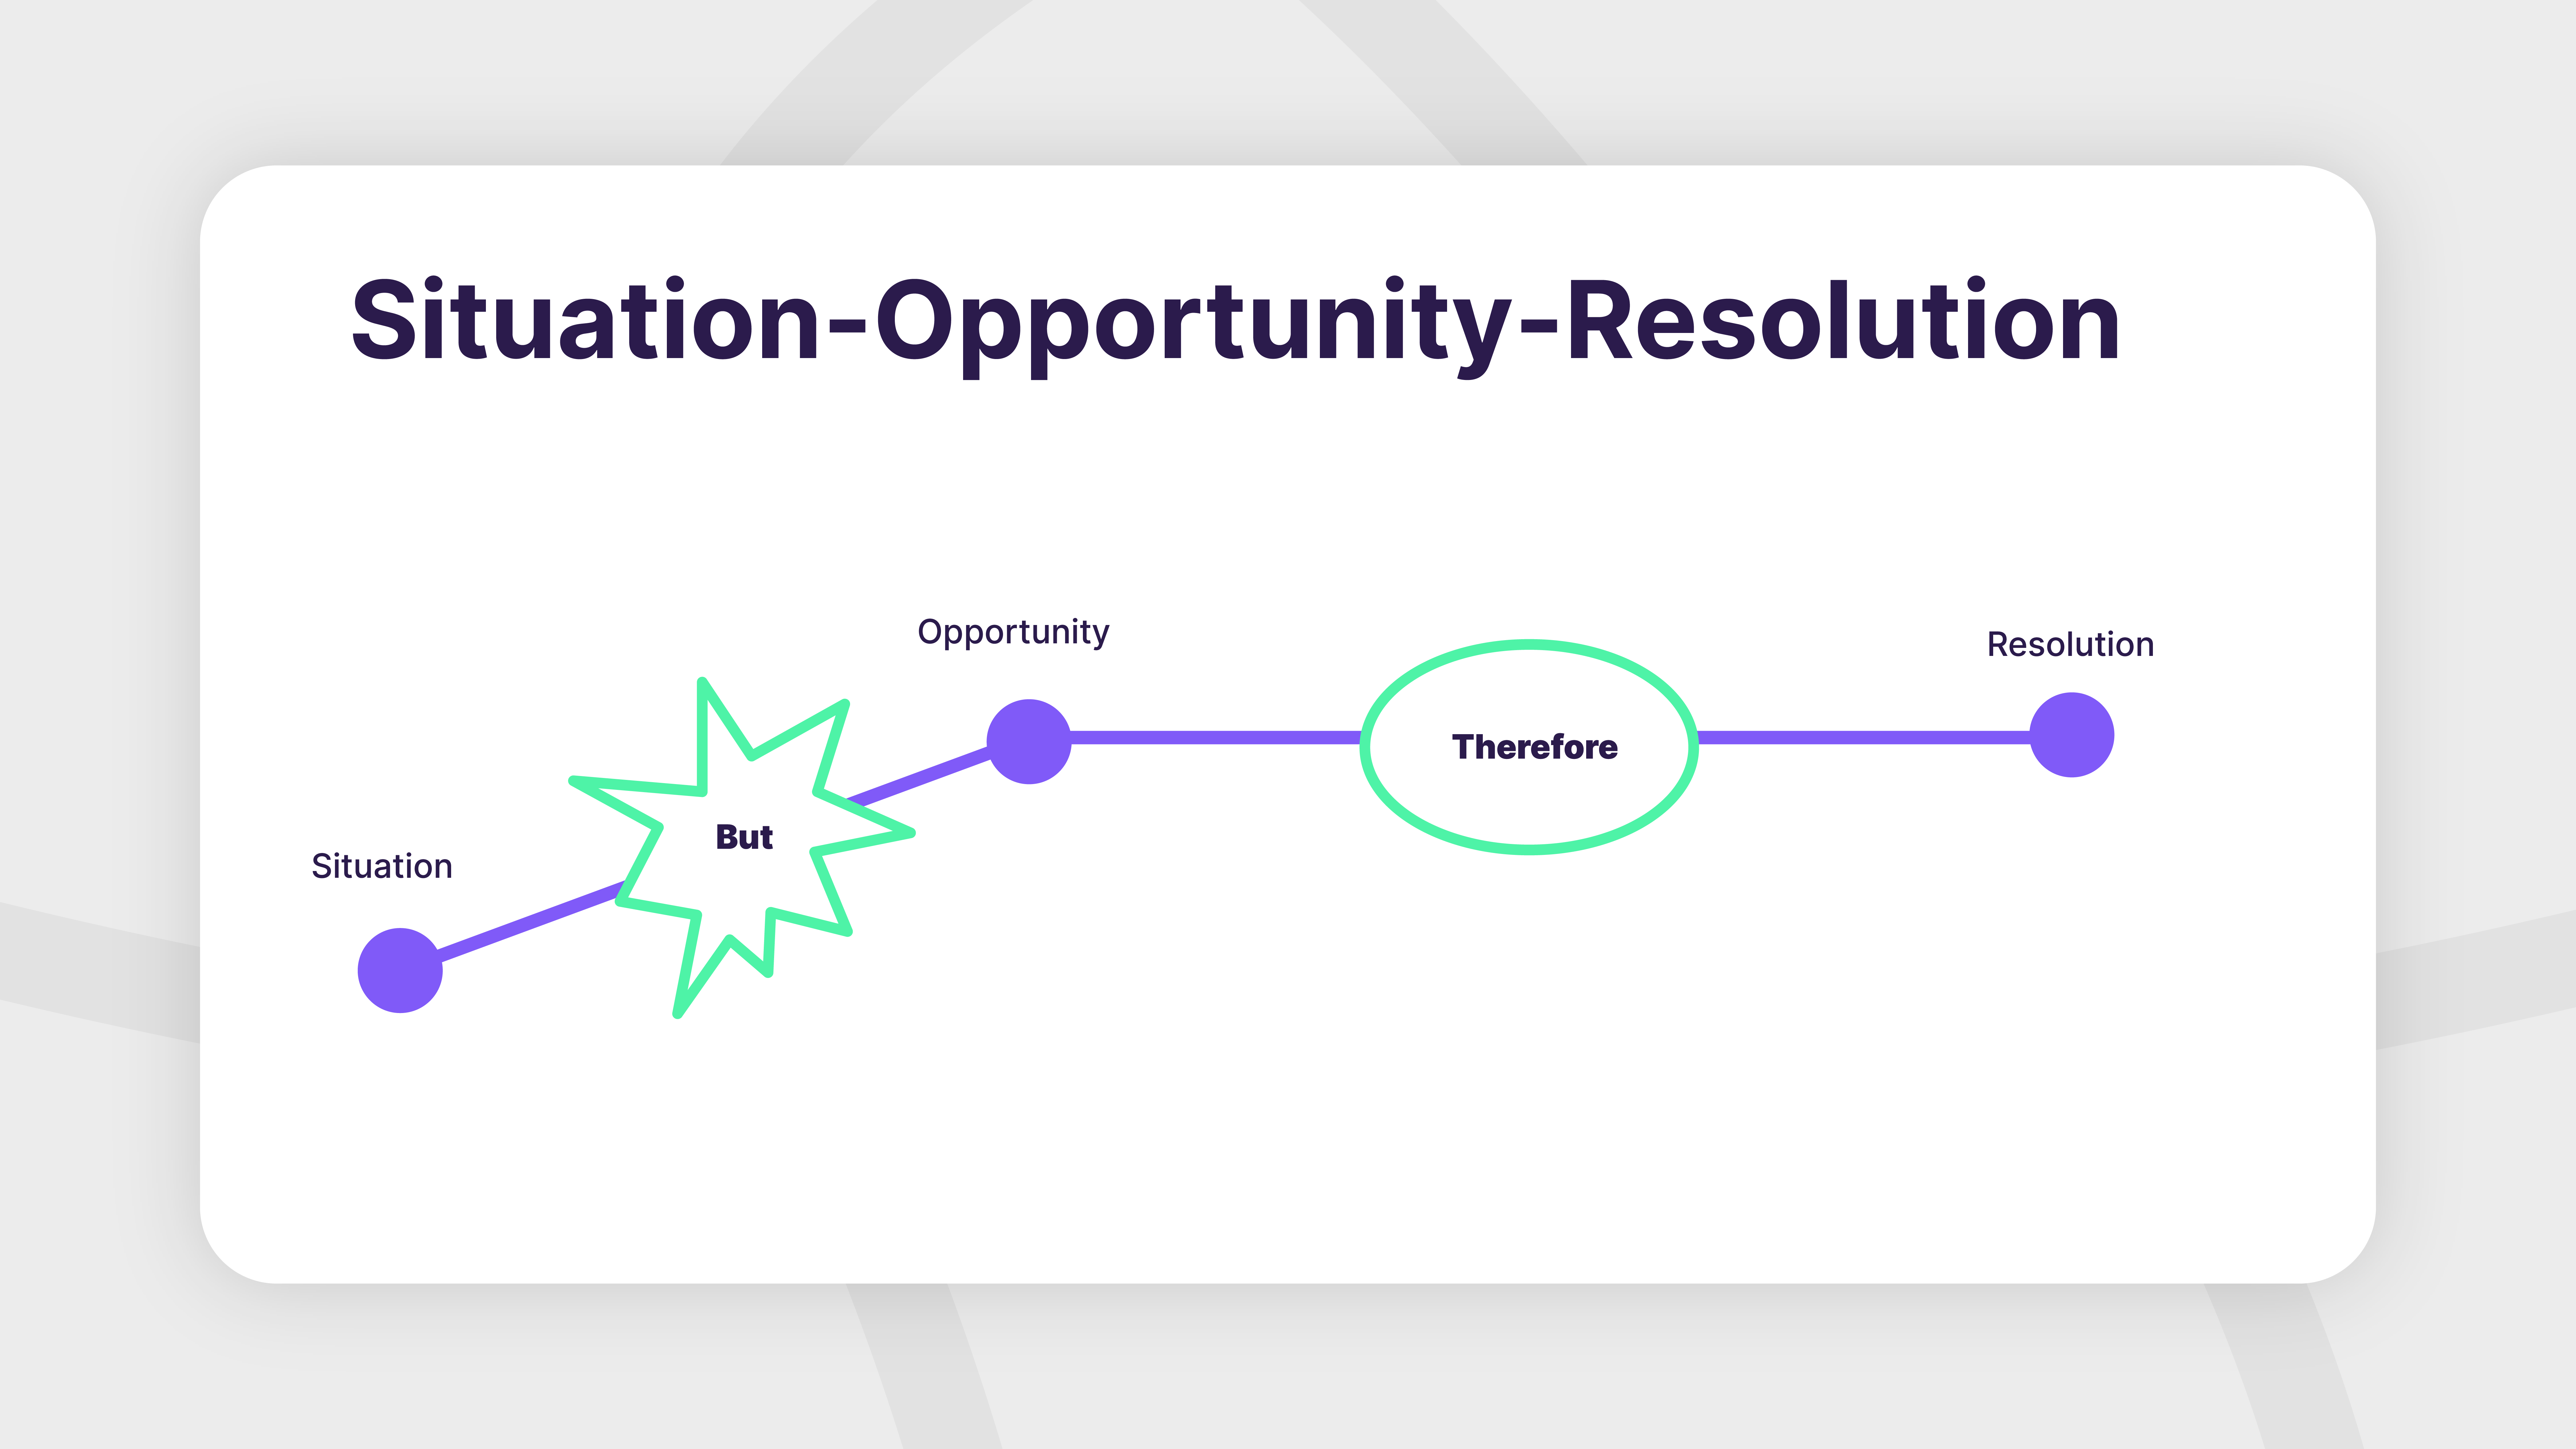 Situation-Opportunity-Resolution storytelling arc